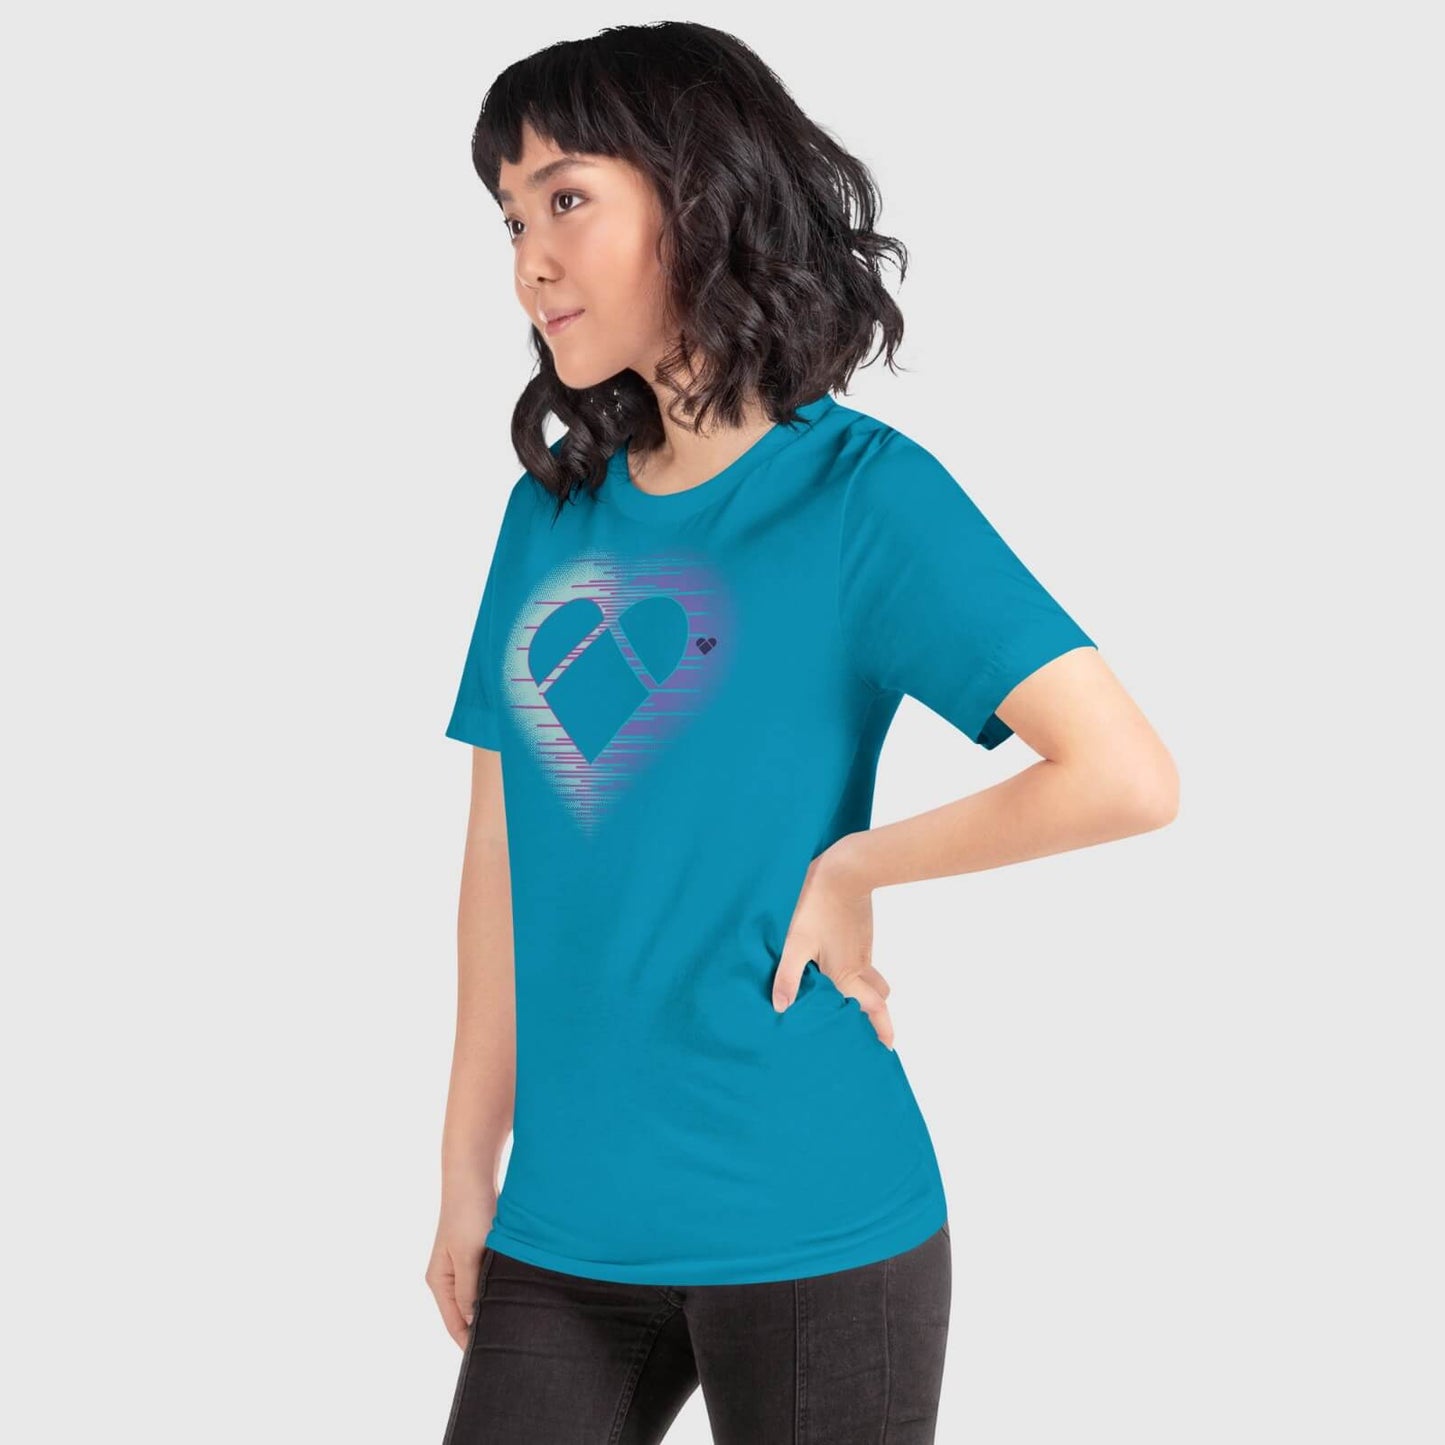 Mint and periwinkle Aqua Tee with heart logo and dual aura from CRiZ AMOR's Amor Dual collection